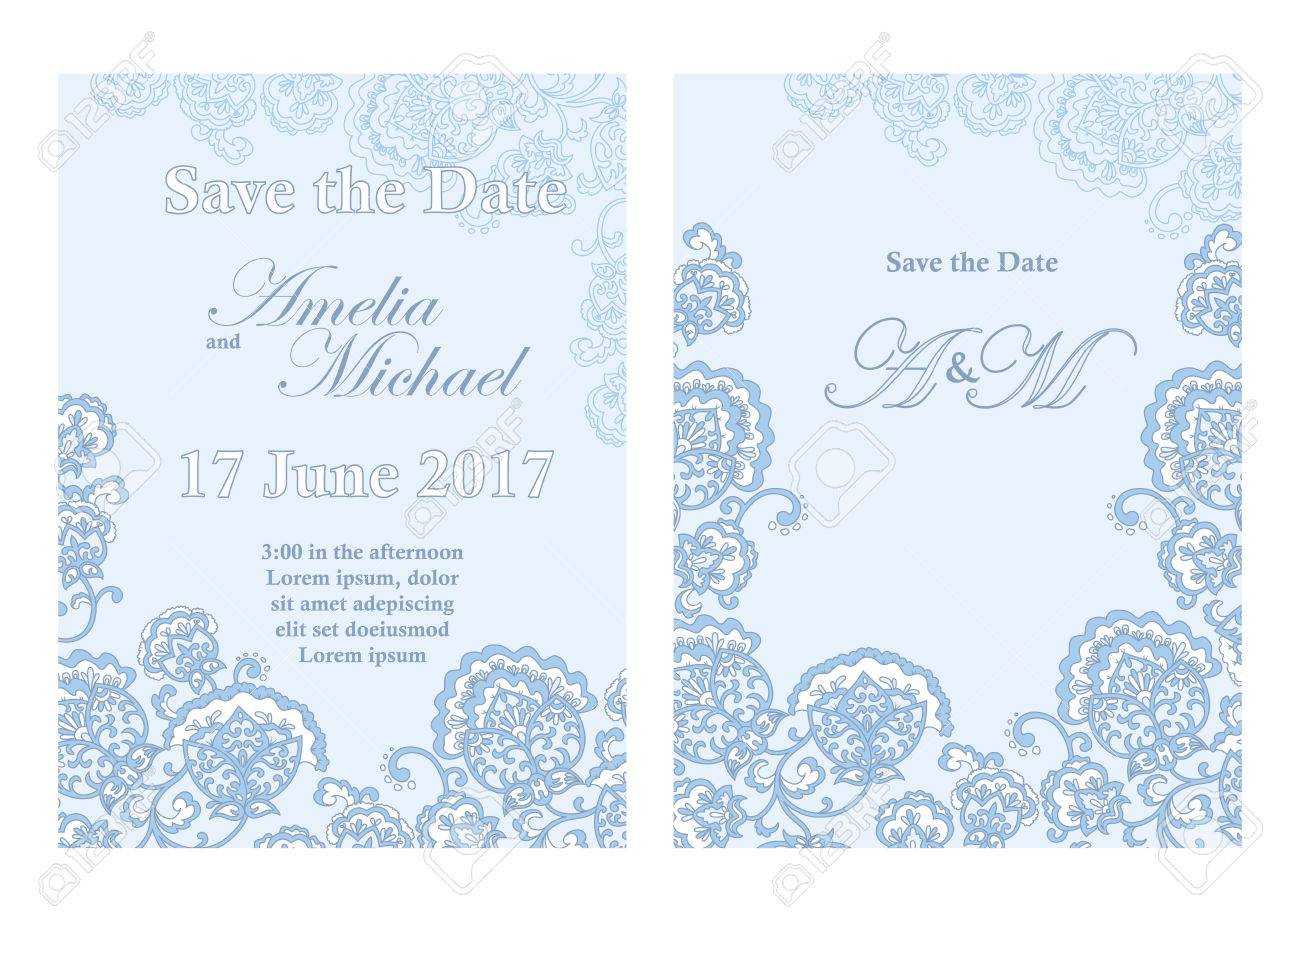 Save The Date Card Template In Light Blue Colors. For Save The Date Cards Templates